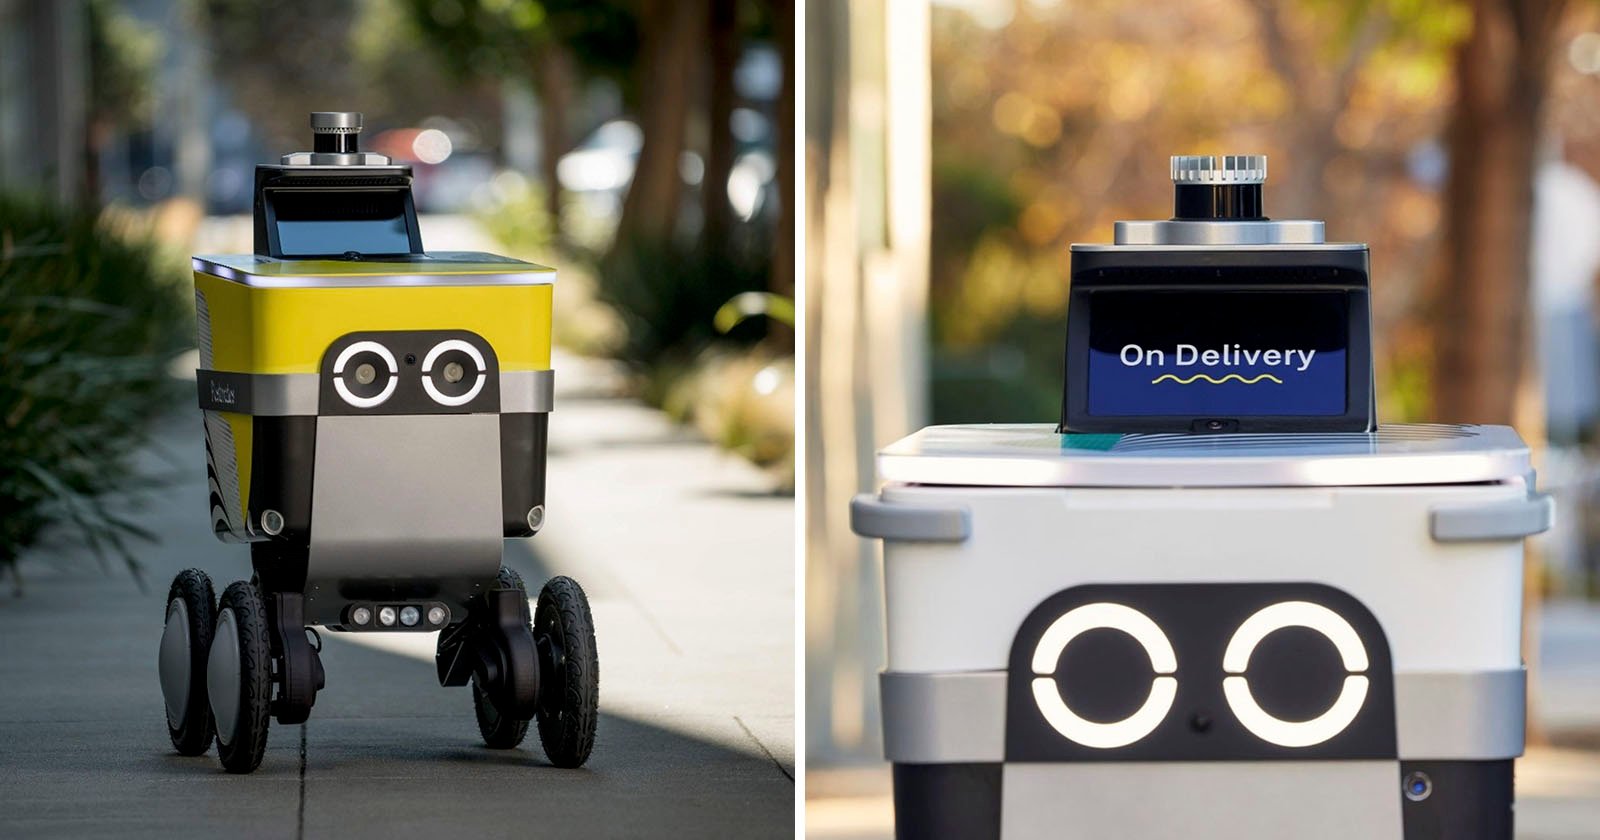  food delivery robots are spying police while 